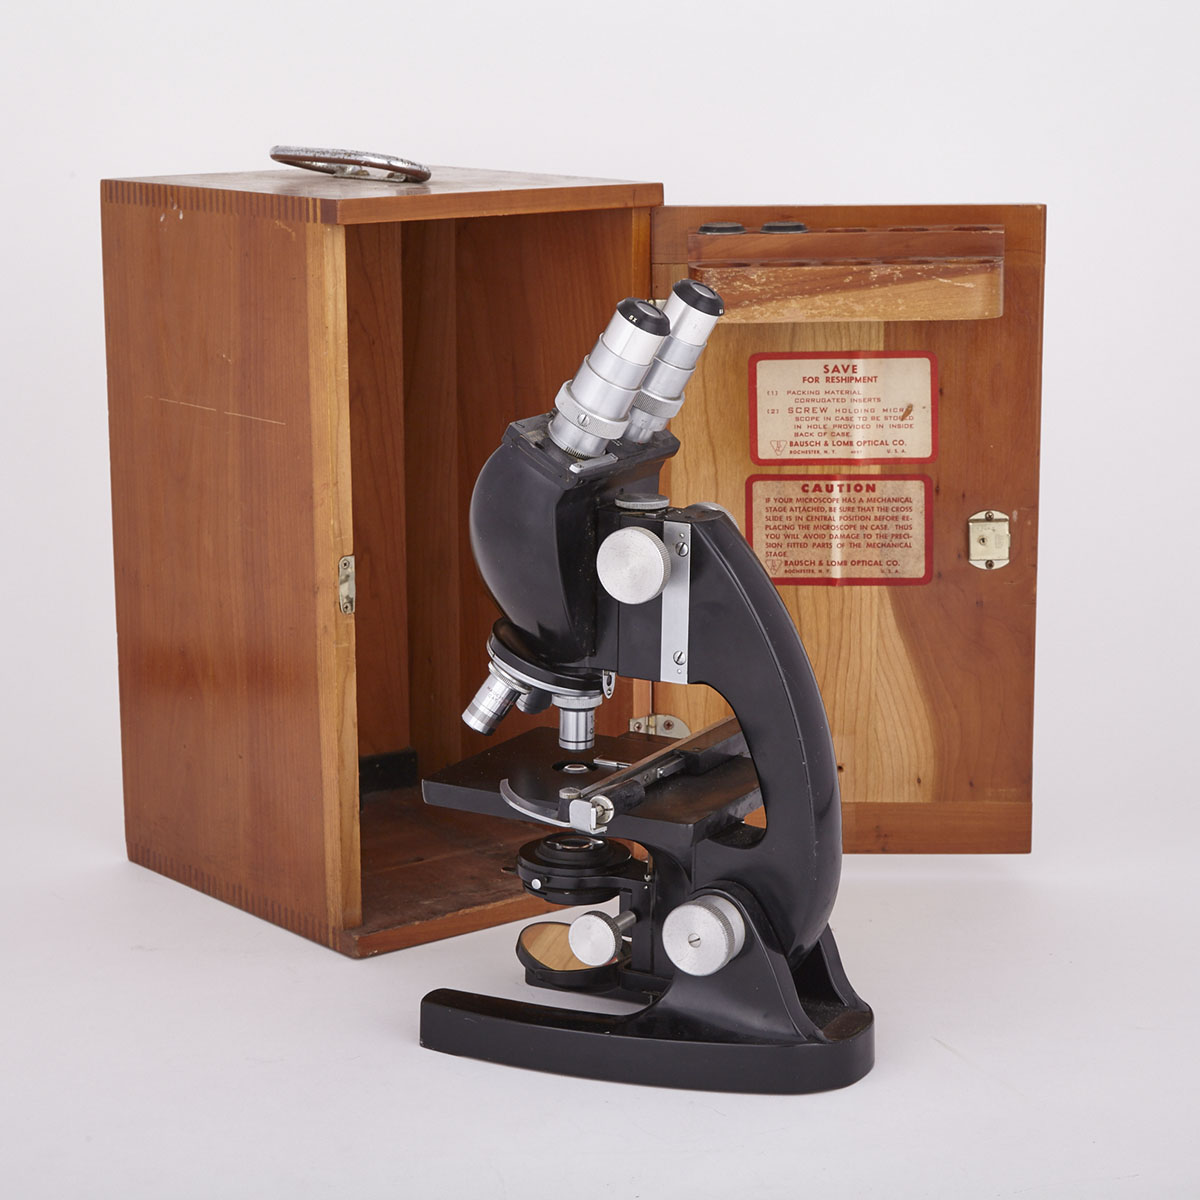 Bausch and Lomb Binocular Black Lacquered Microscope, 20th century